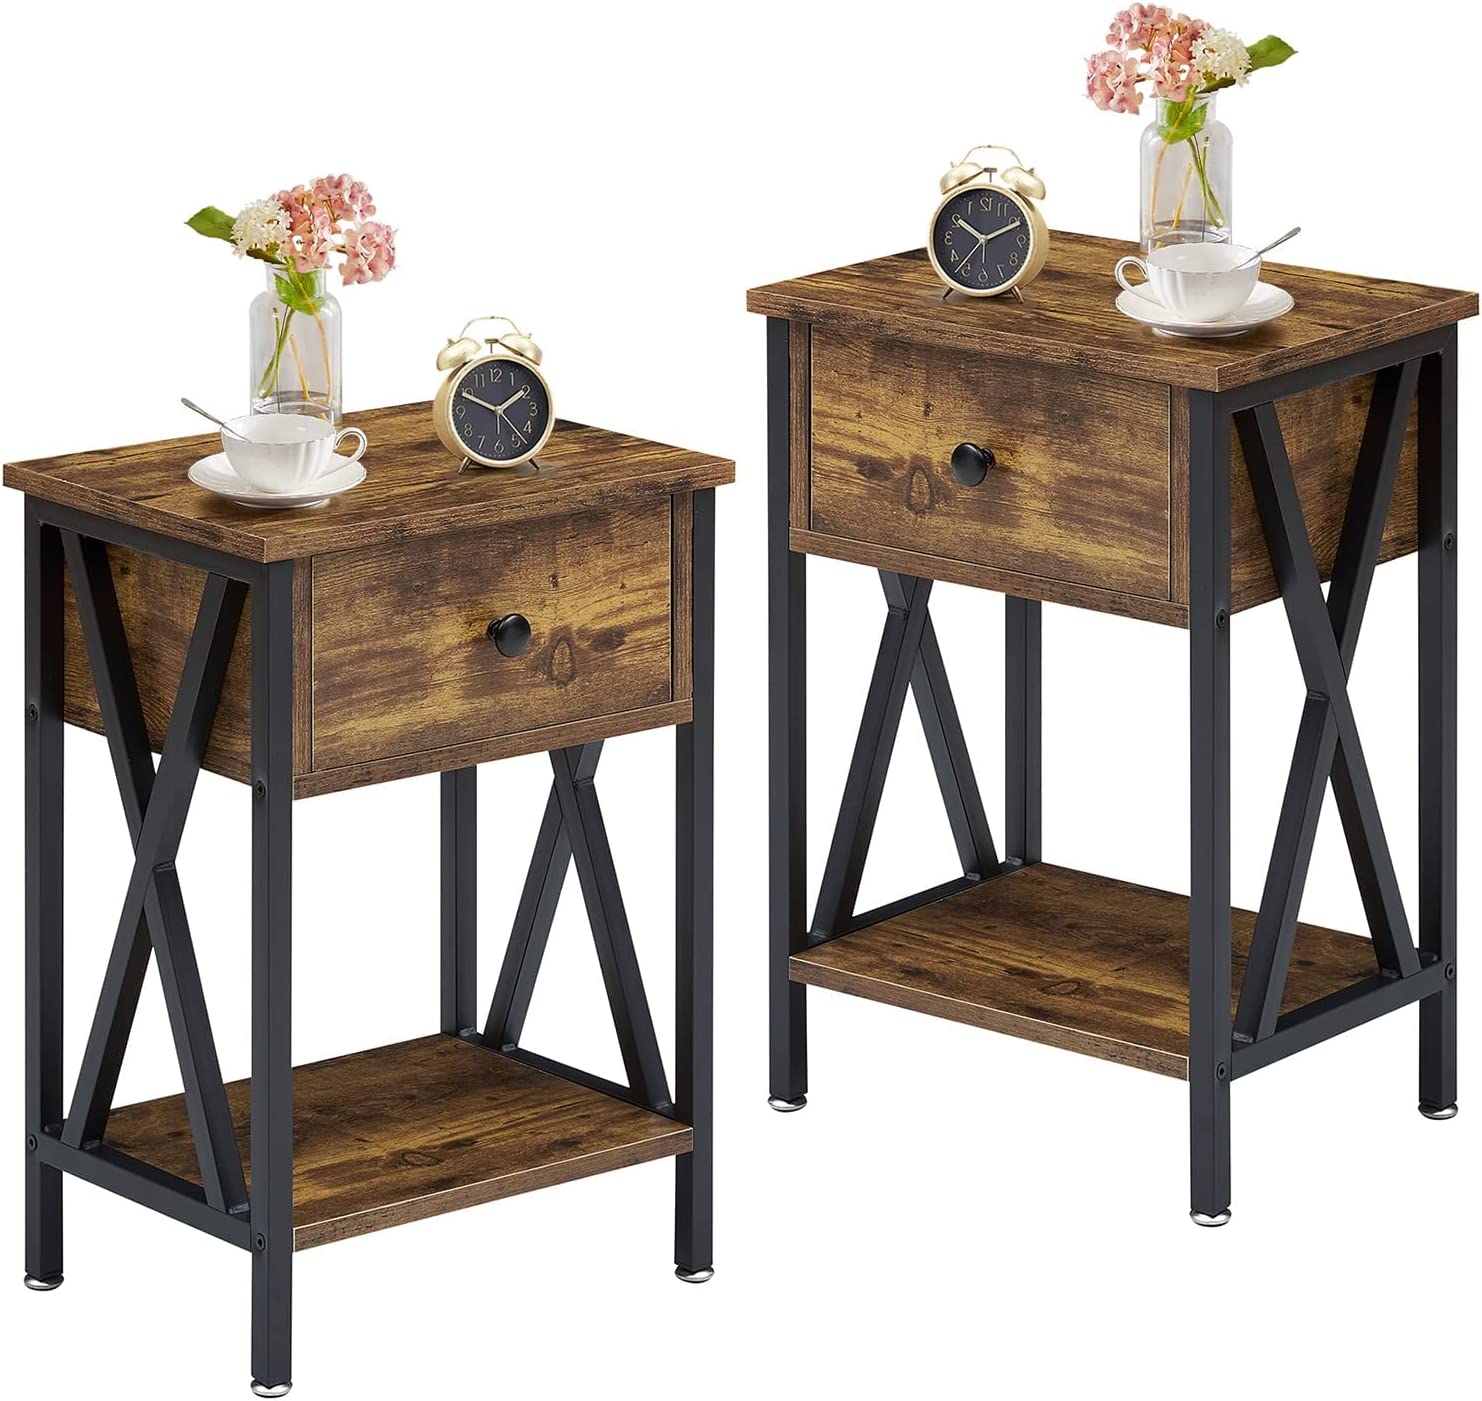  MKYOKO Bedside Tables, Night Stand, End Table with Storage  Drawers for Bedroom and Living Room, Rustic Wood Grain Print (Color : B) :  Home & Kitchen